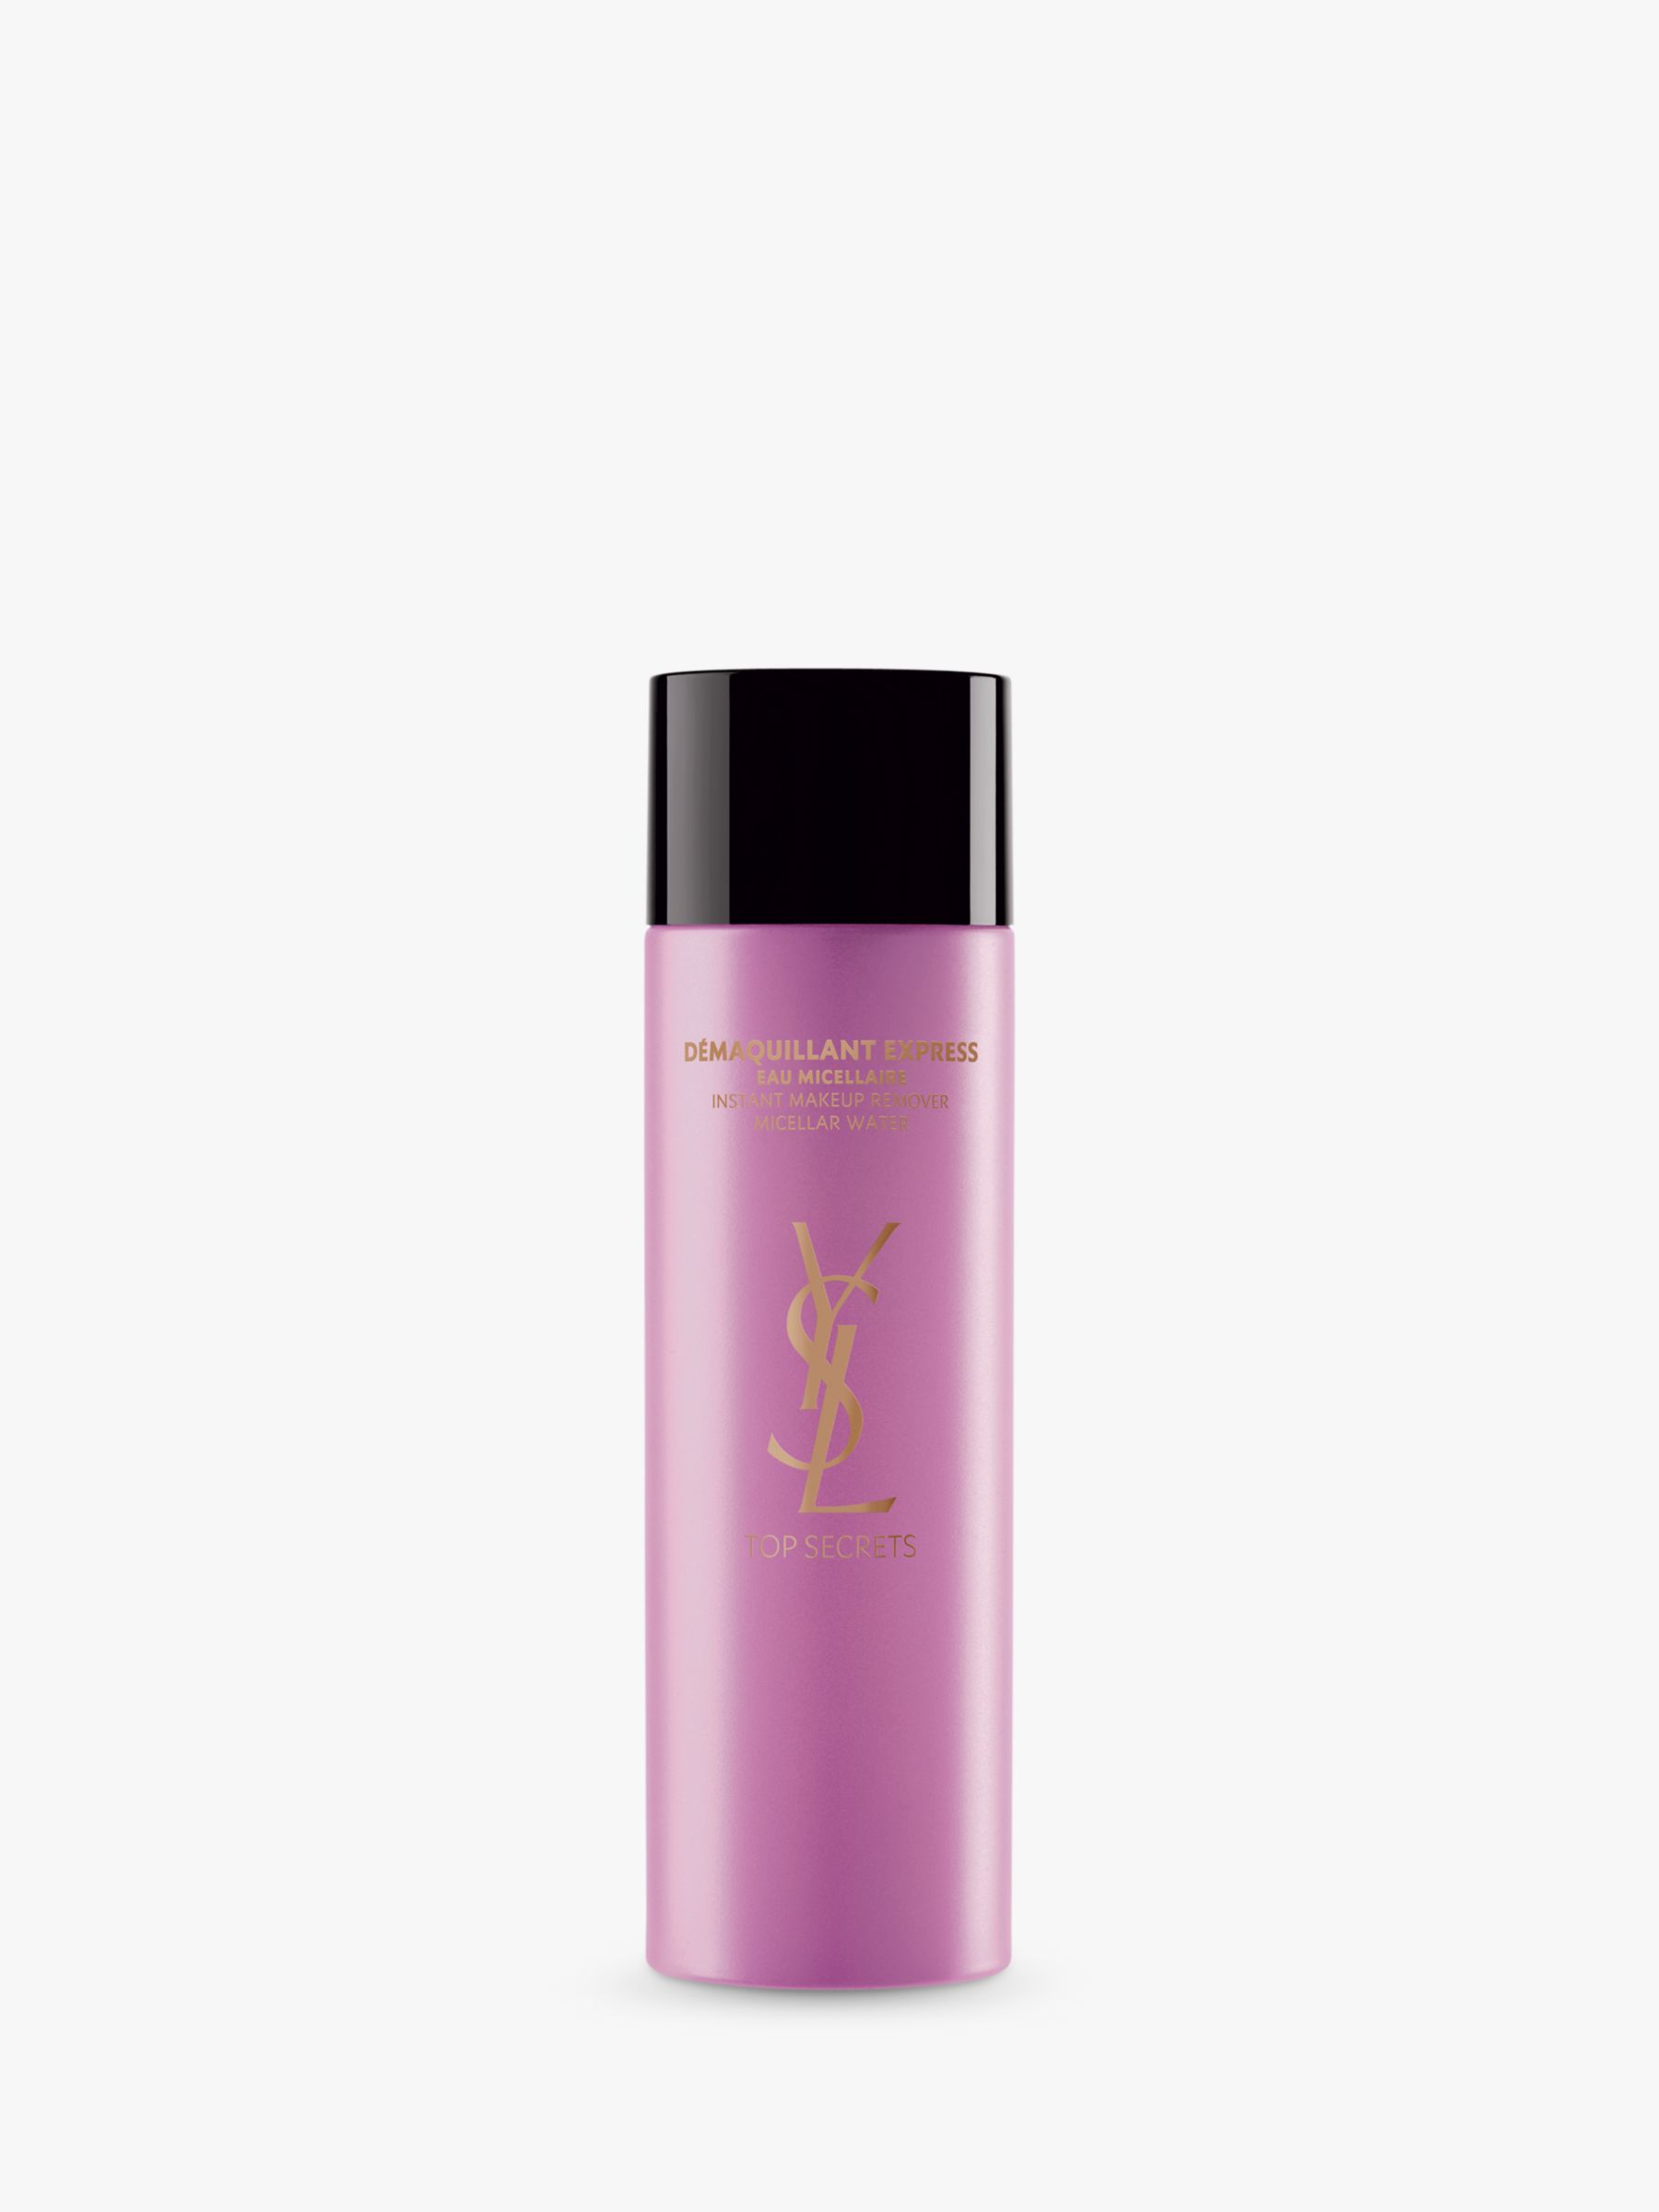 Ysl toning and cleansing water review : Apple cinnamon colon cleanse